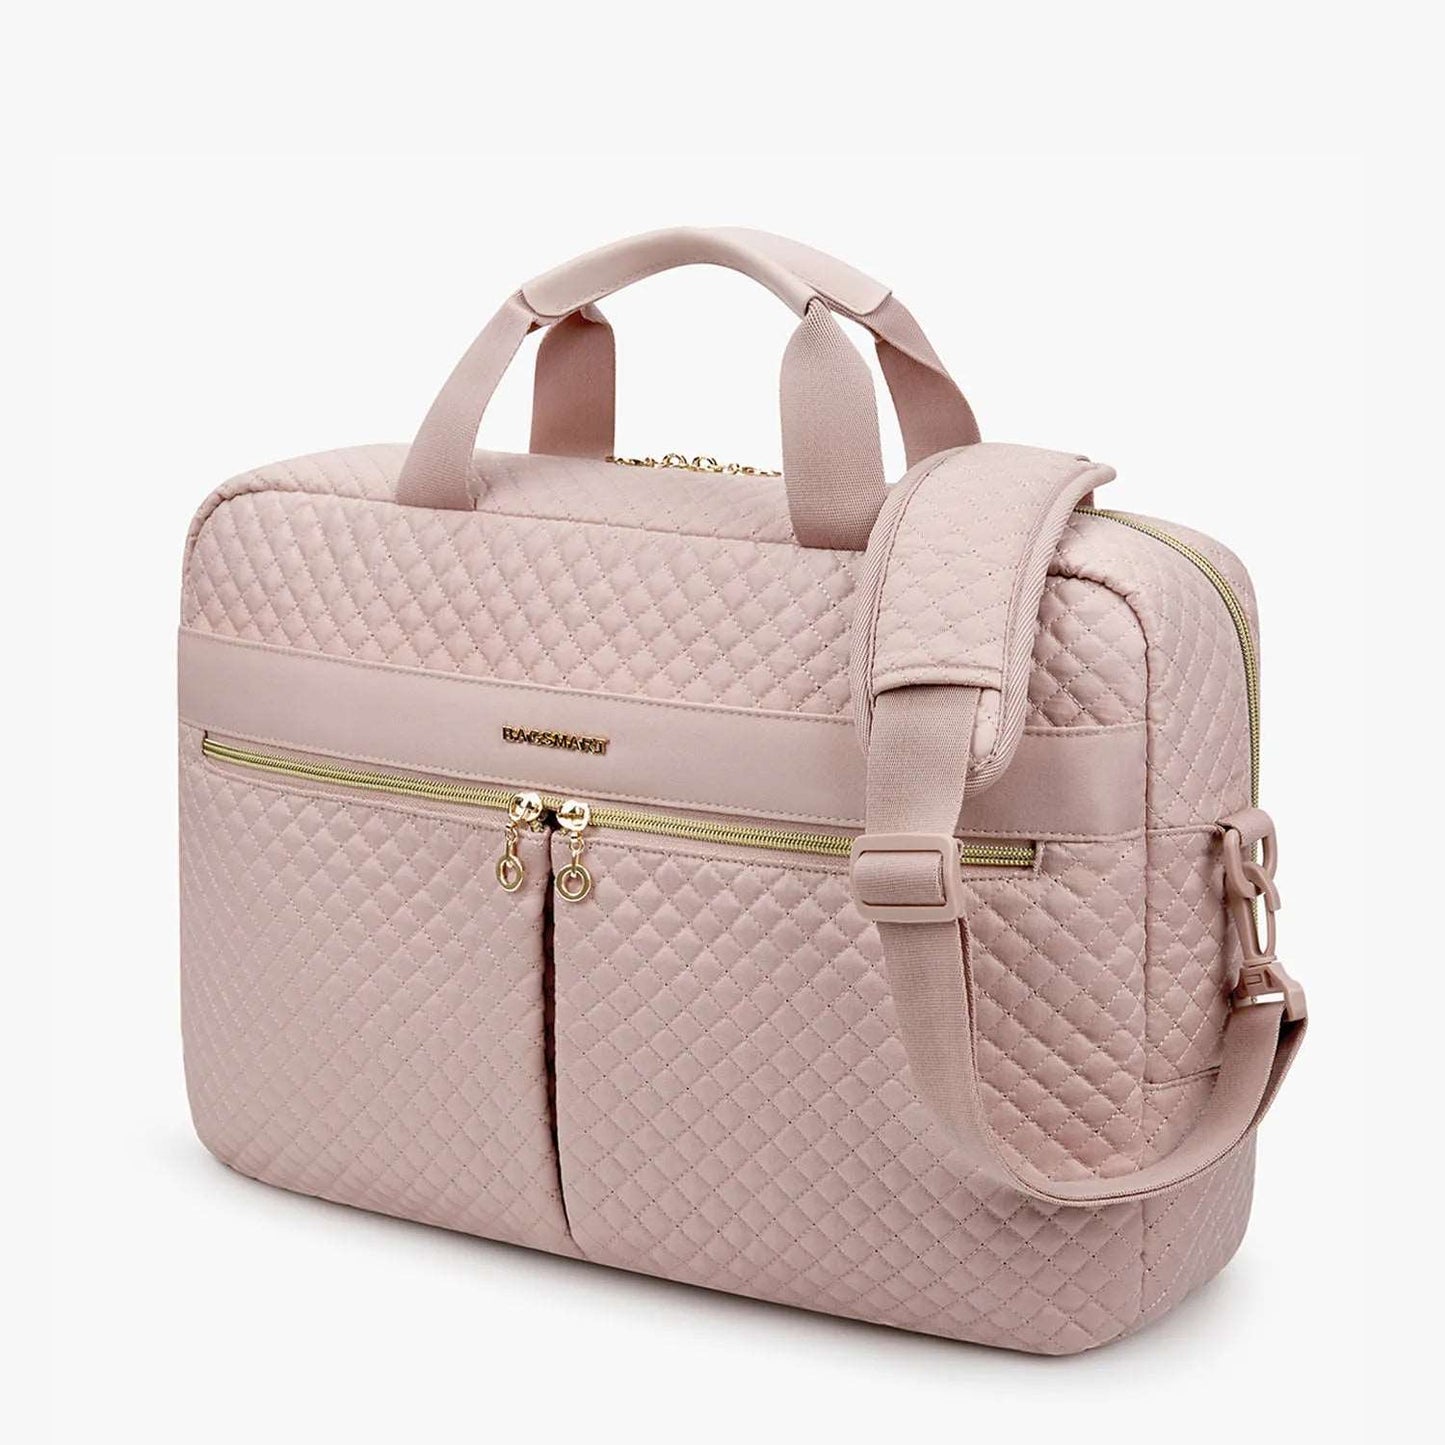 BAGSMART Laptop Bags for Women 15.6 17.3 inch Notebook / Macbook Air Pro 13 15 Bag Pink for 17.3 inch laptop 1